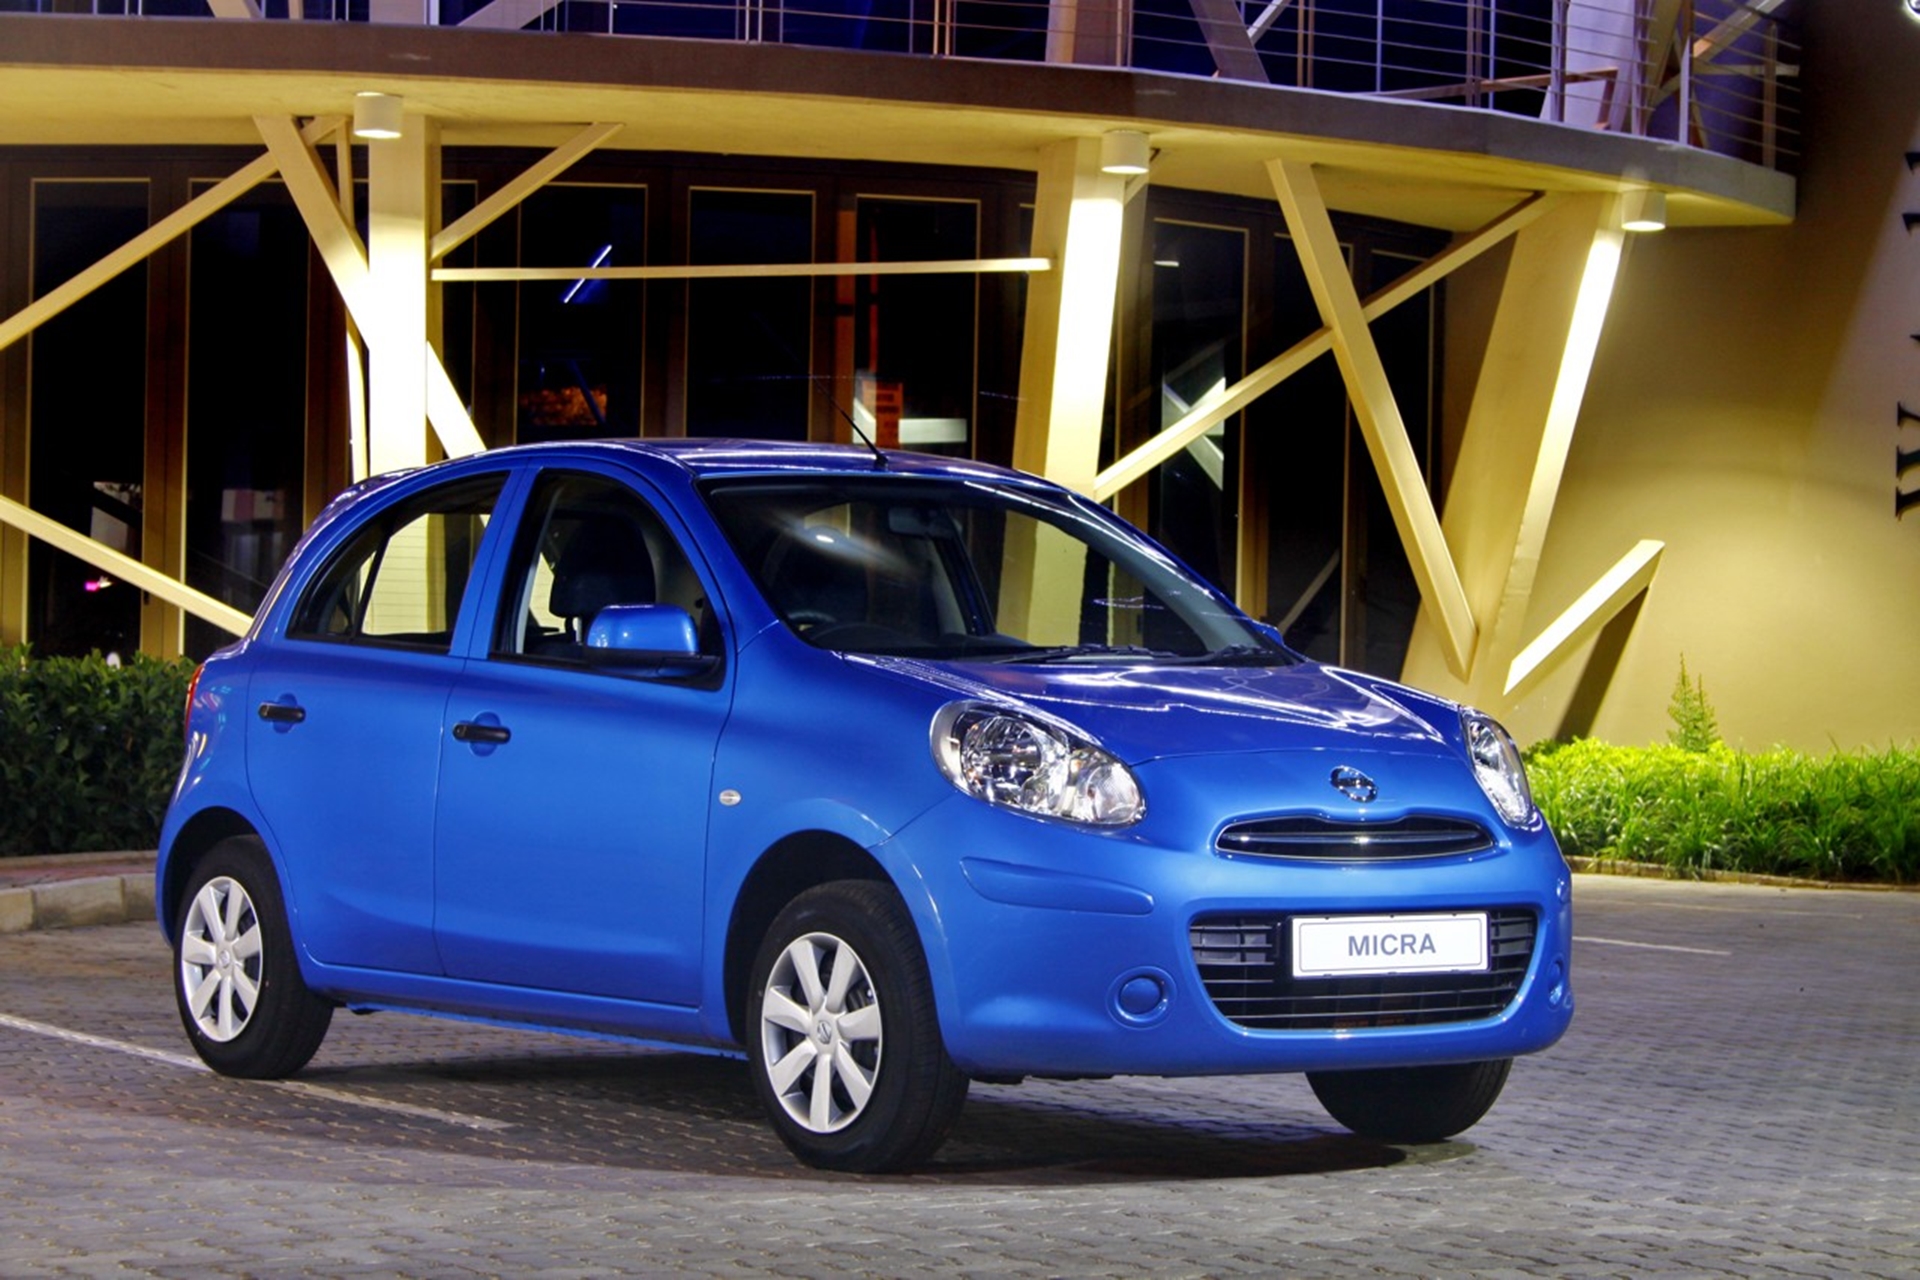 TOP MARKS FOR MICRA IN 2012 KINSEY REPORT